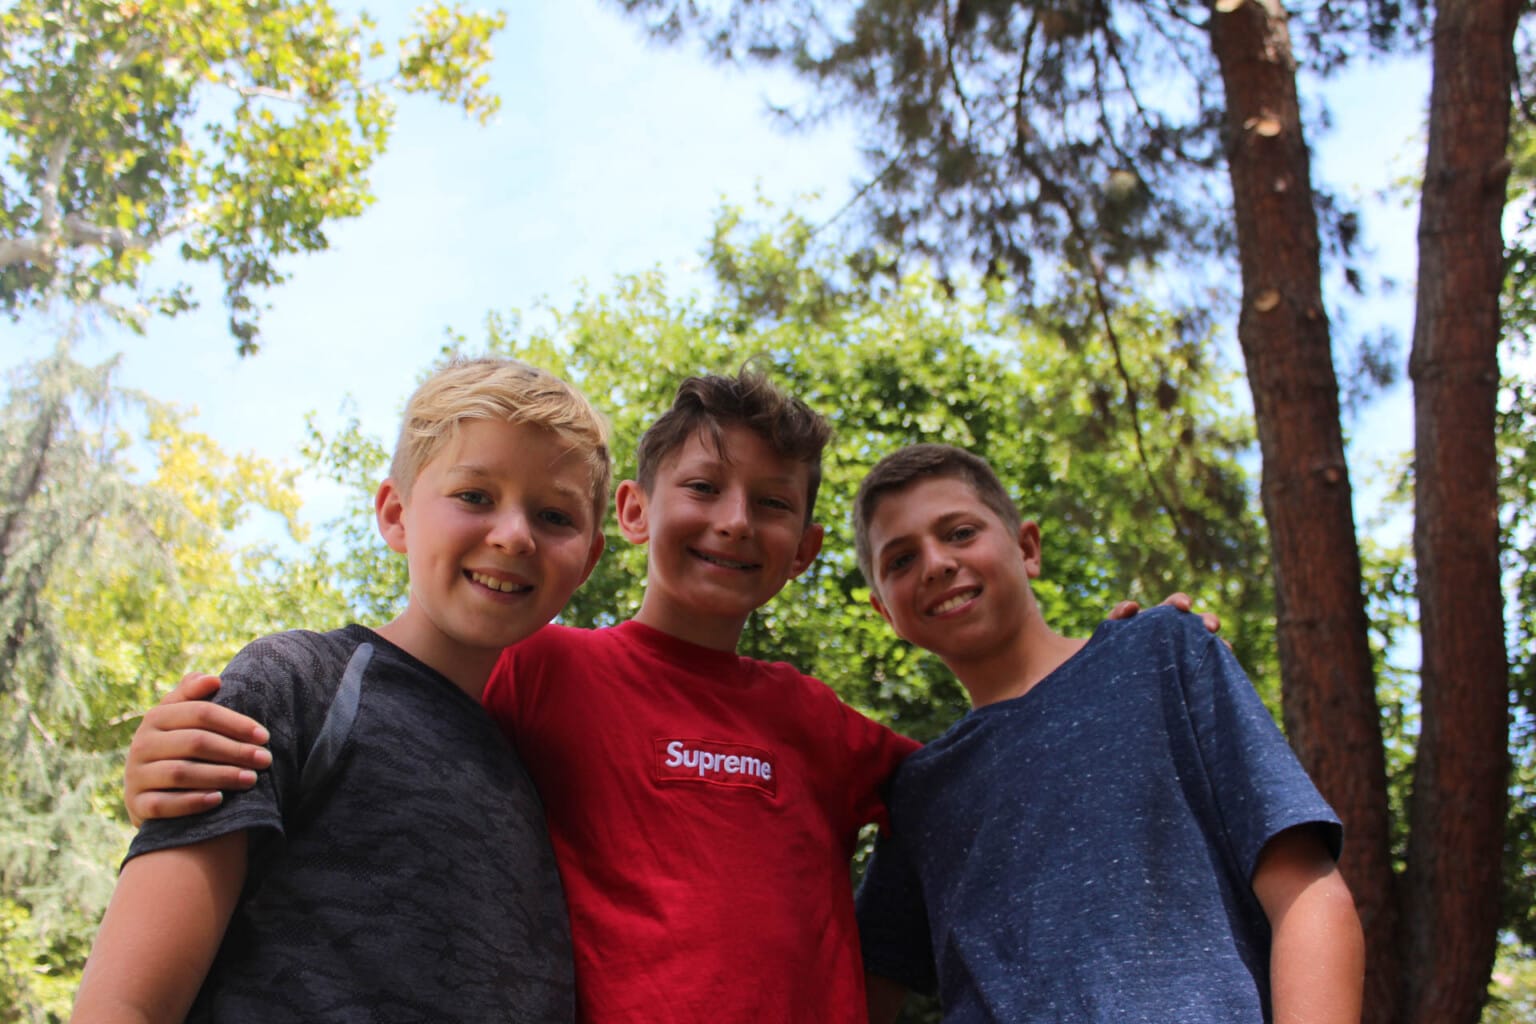 Three campers smiling together.